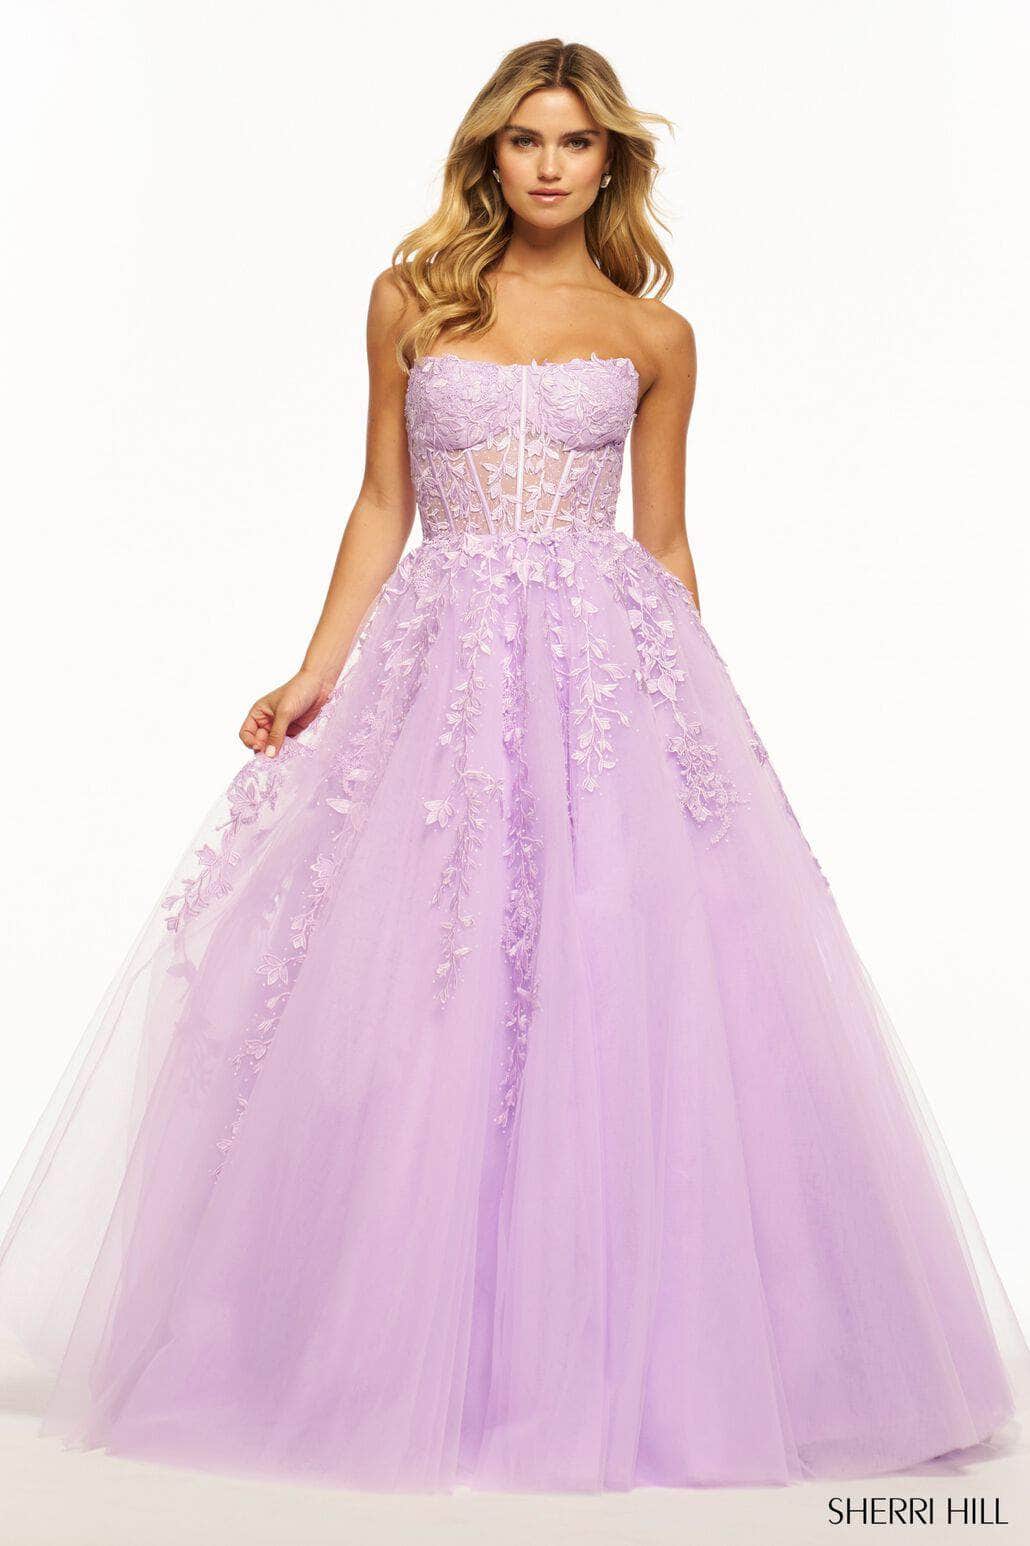 Image of Sherri Hill 55993 - Scoop Illusion Corset Gown